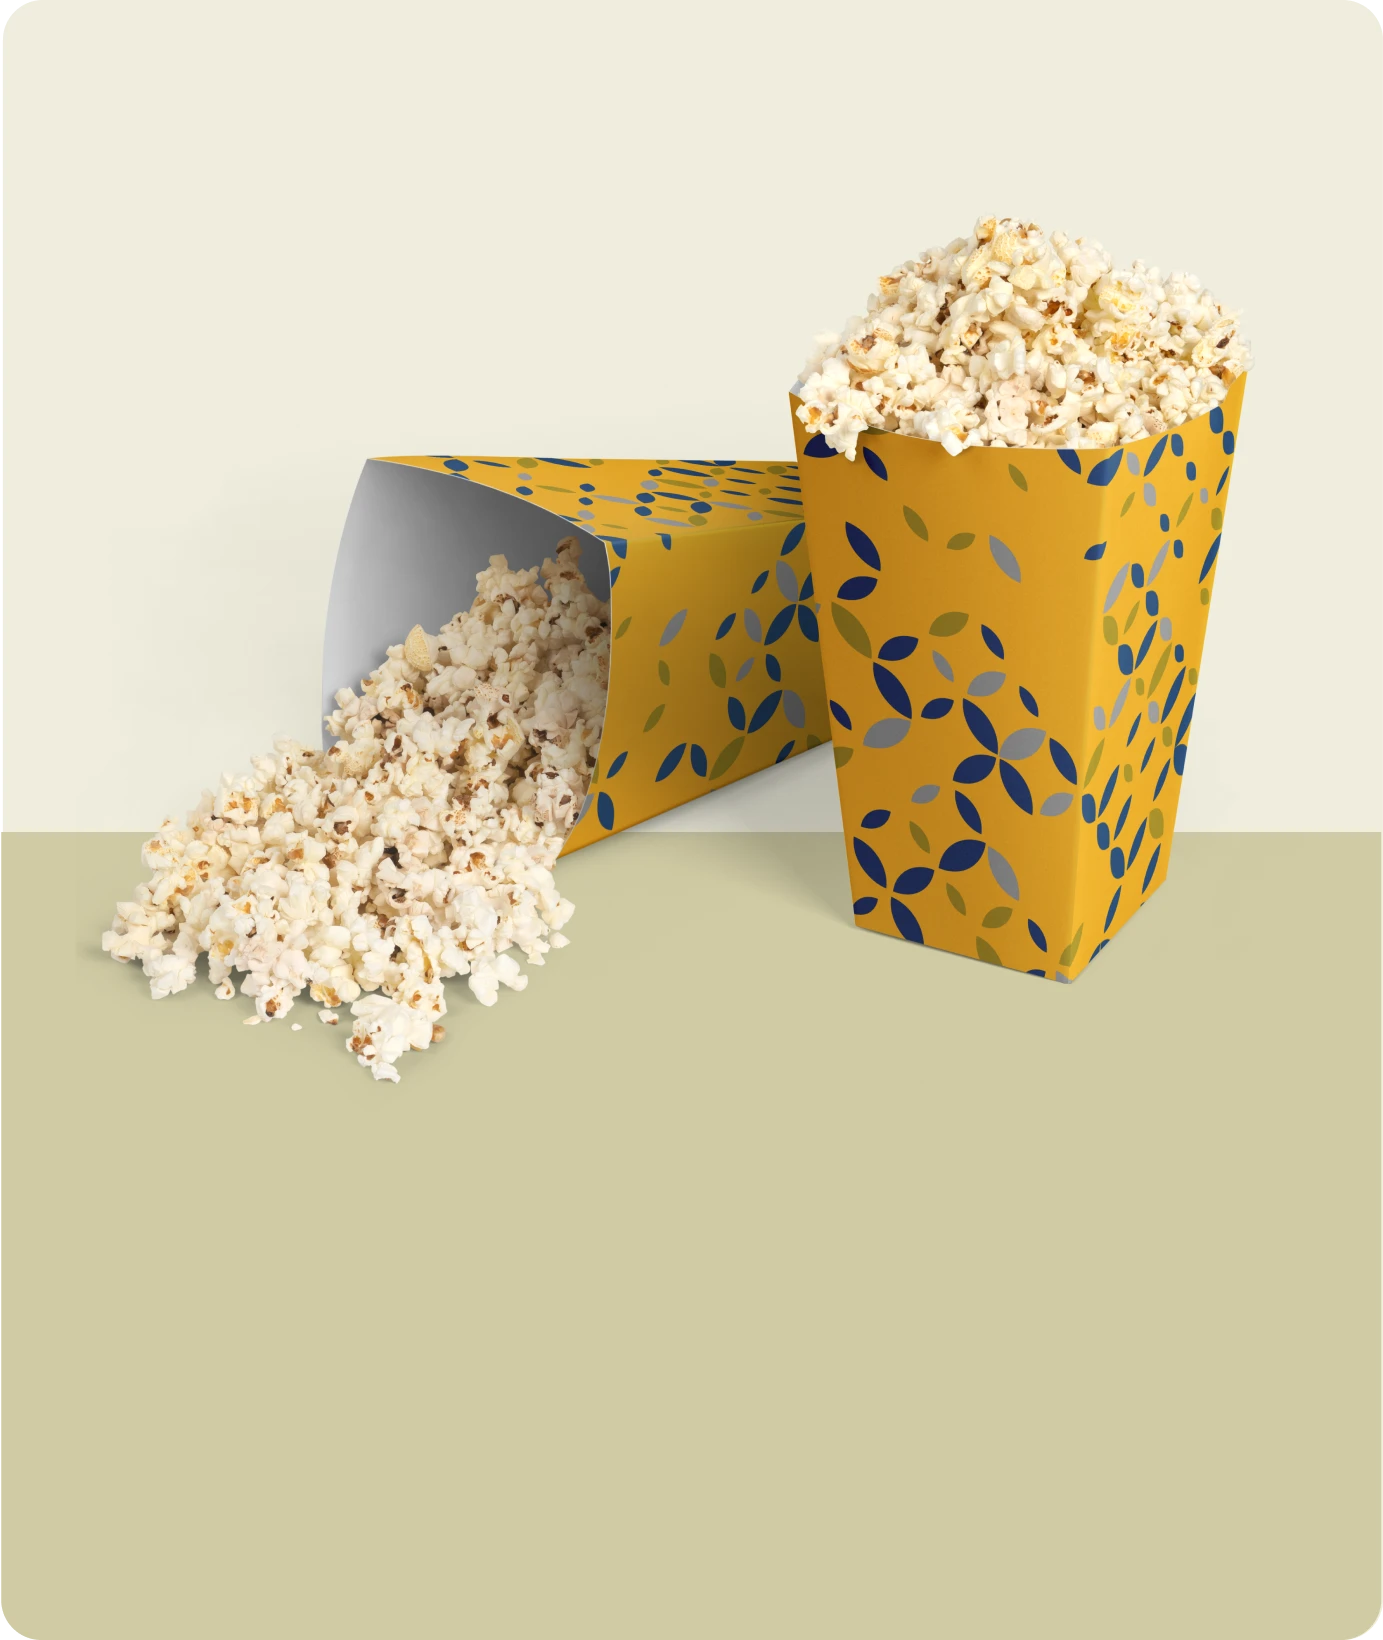 Pop-Corn Boxes related product image | The Box Lane